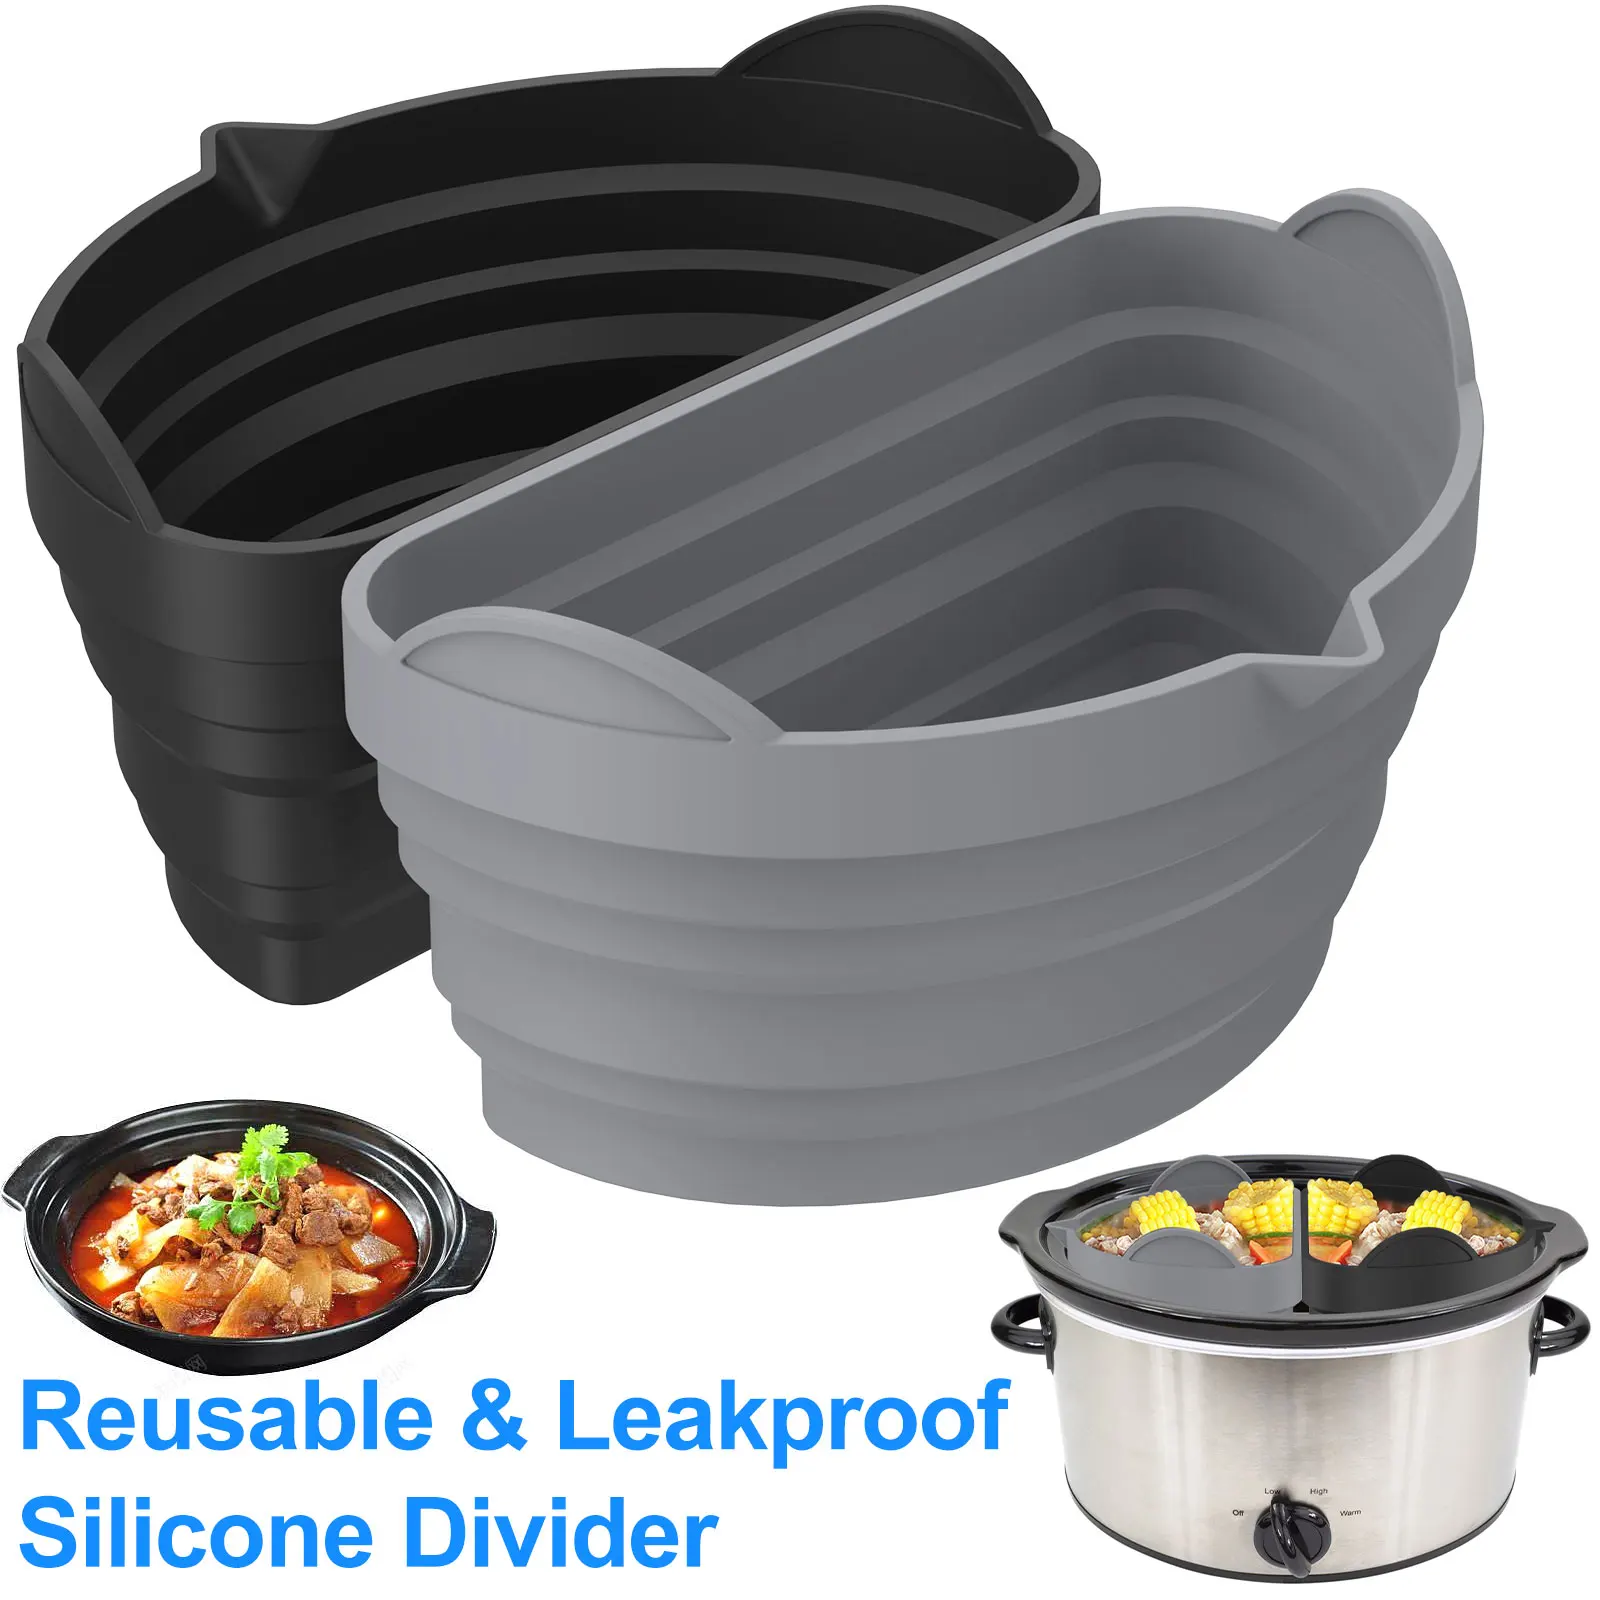 https://ae01.alicdn.com/kf/S86c6c48708fe4df8b56e45c9103abd26p/Durable-Silicone-Slow-Cooker-Liners-for-6-QT-Pot-Reusable-Silicone-Crockpot-Divider-Non-stick-Easy.jpg